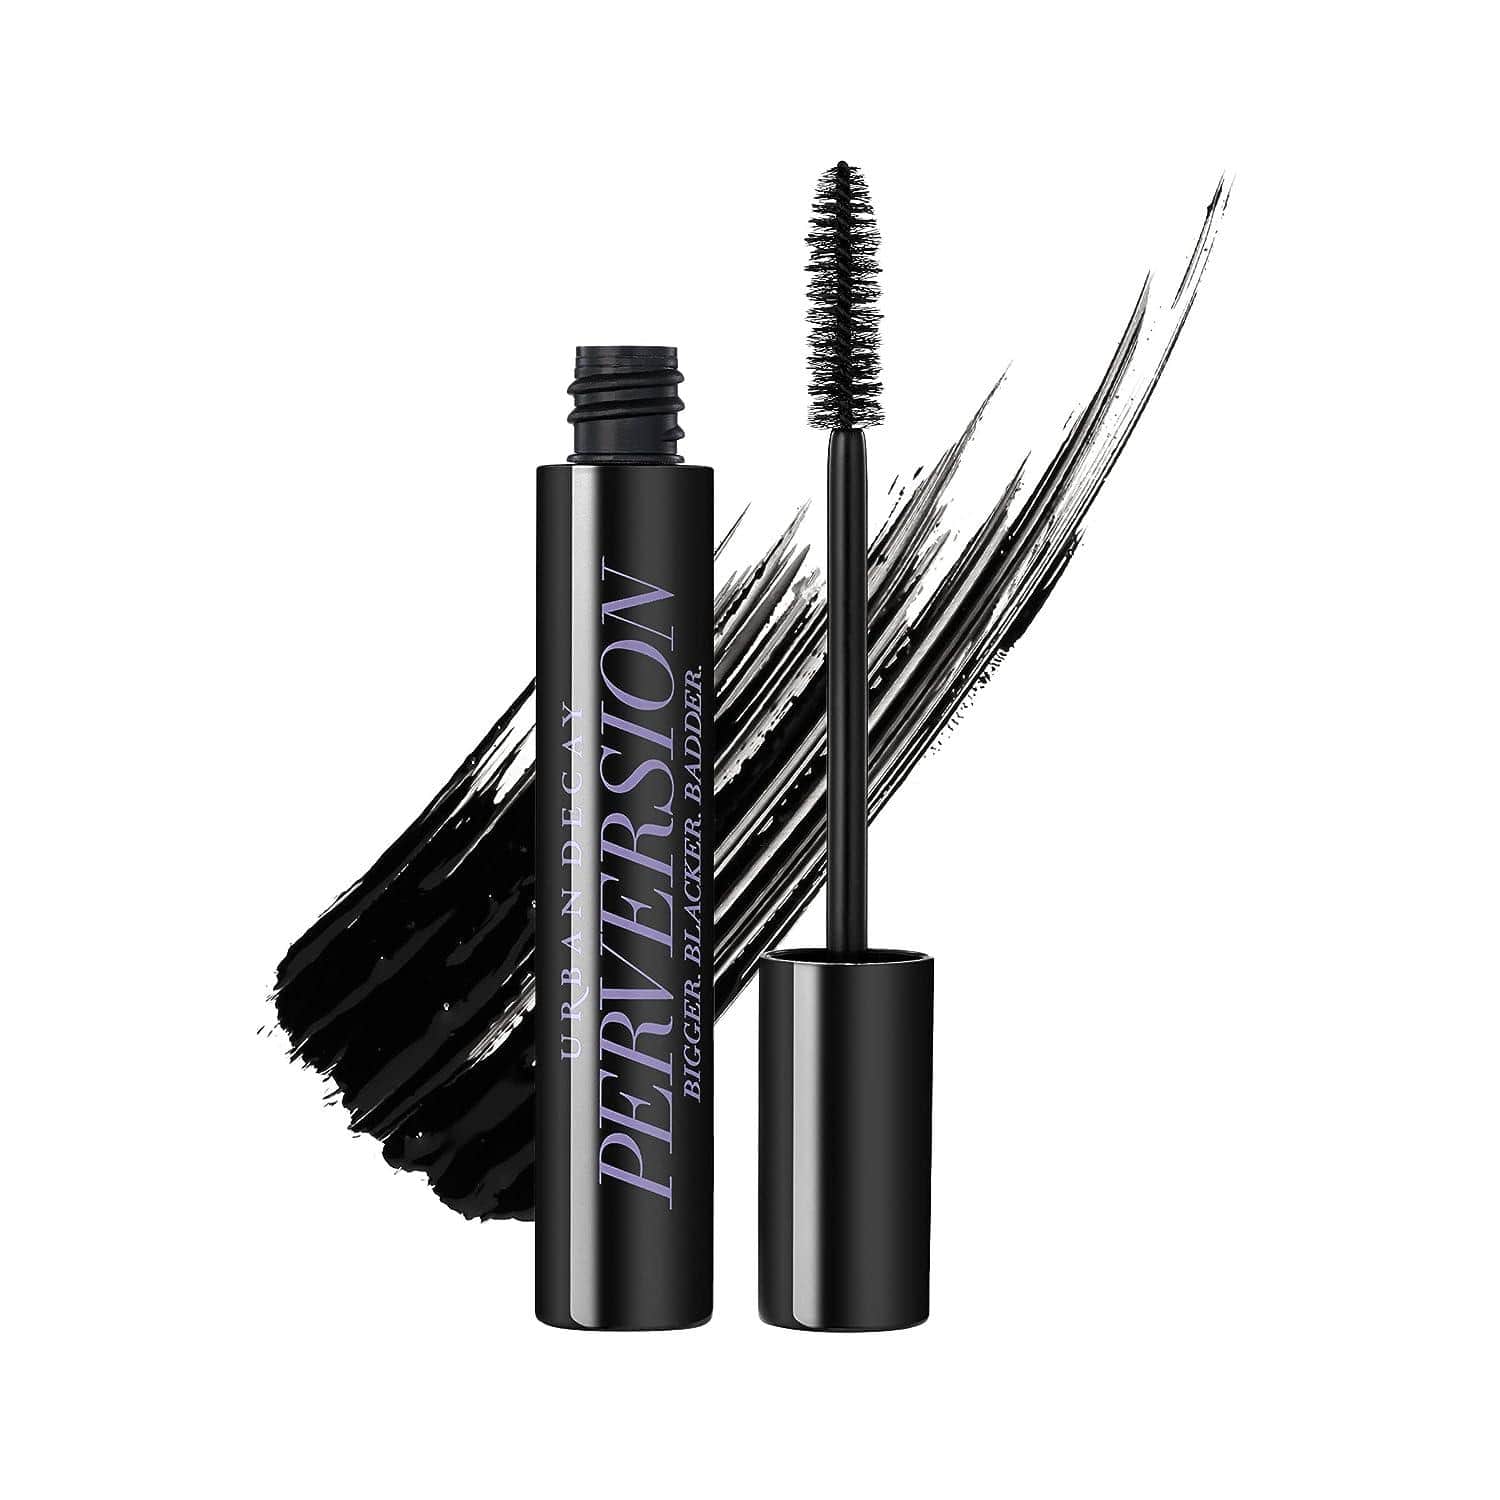 Urban Decay's mascara, with a root-grabbing brush, delivers bold lashes and contains hardeners for lash growth stimulation—earning its place in my collection of volumizing mascaras.